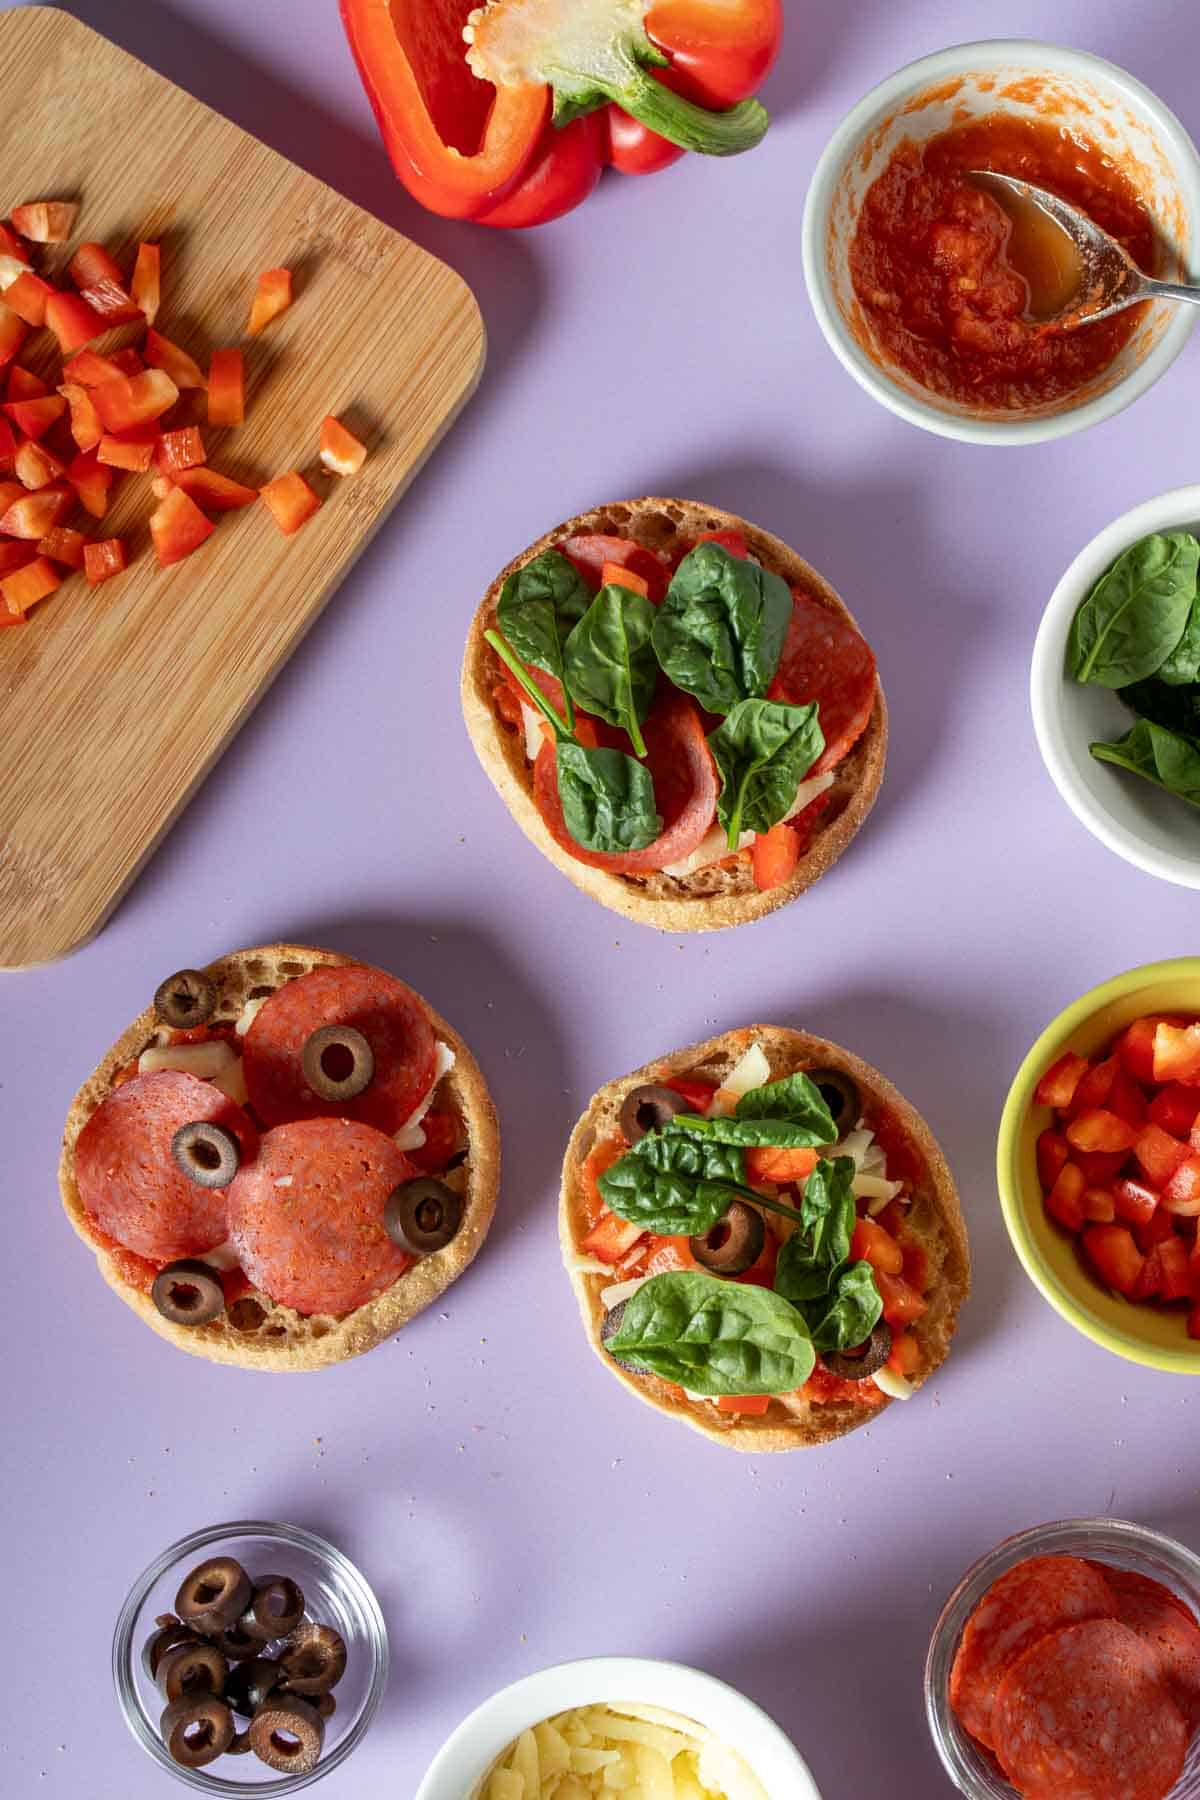 Spinach put on English muffin pizzas topped with pepperoni and veggies and other ingredients on a purple surface next to them.